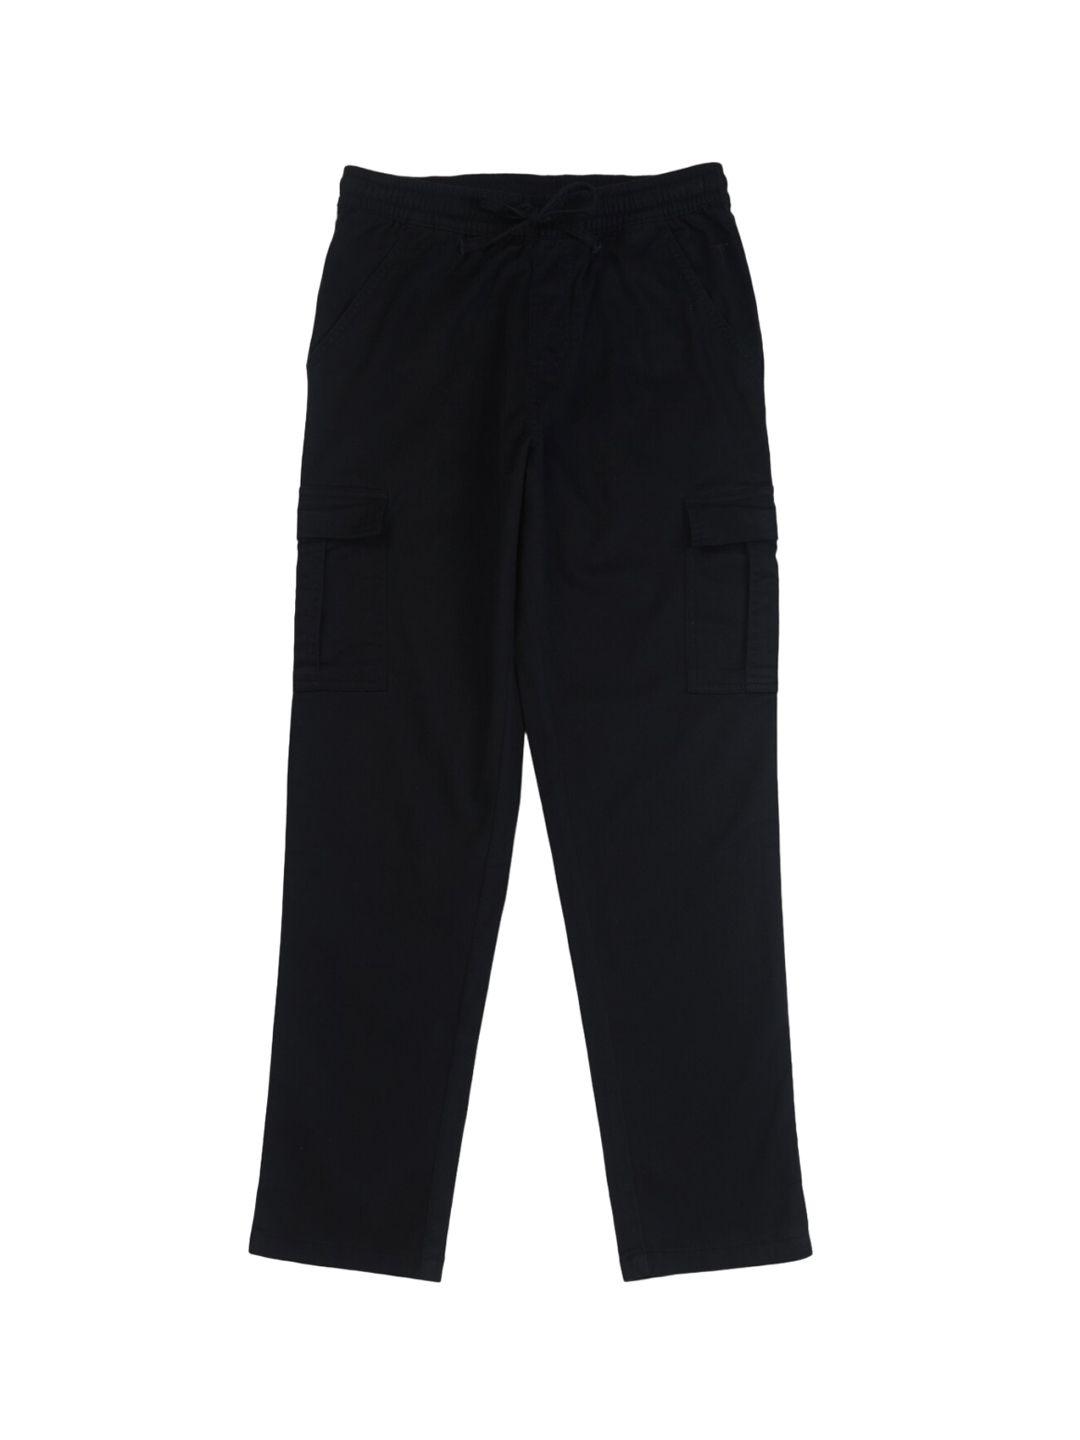 palm-tree-boys-mid-rise-cotton-cargos-trousers